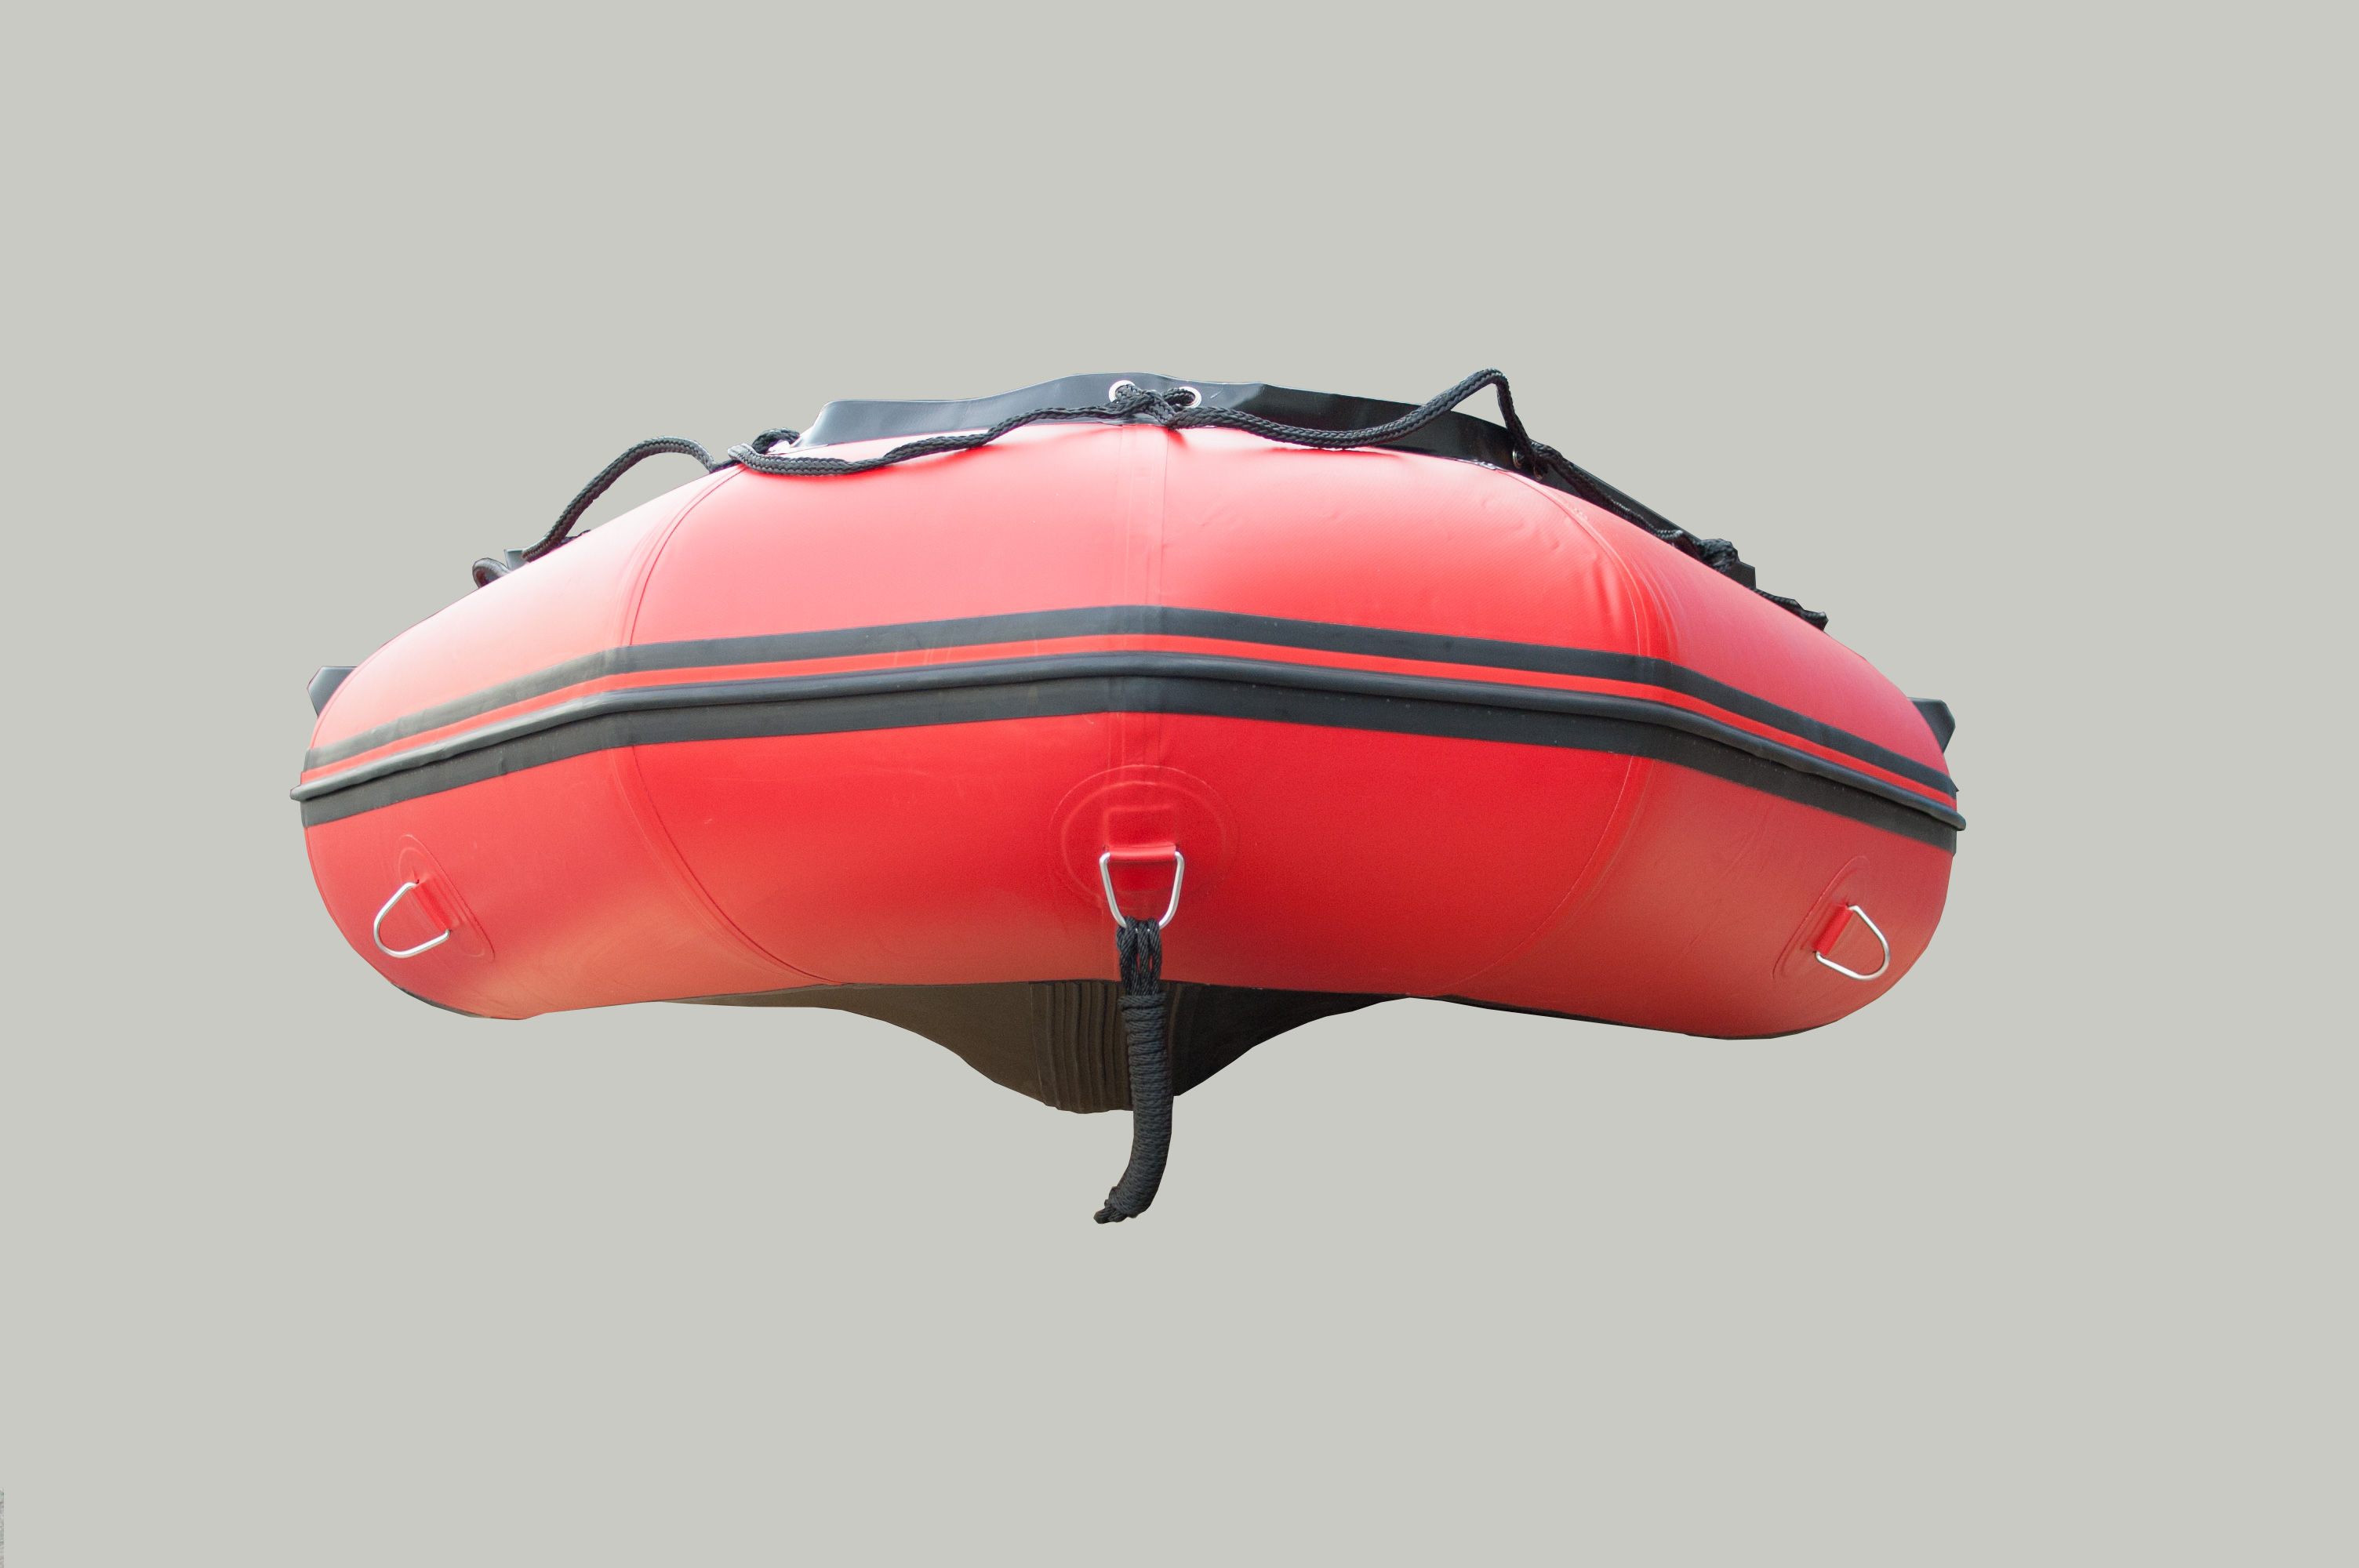 12 ' ft INFLATABLE BOAT SPORT SERIES